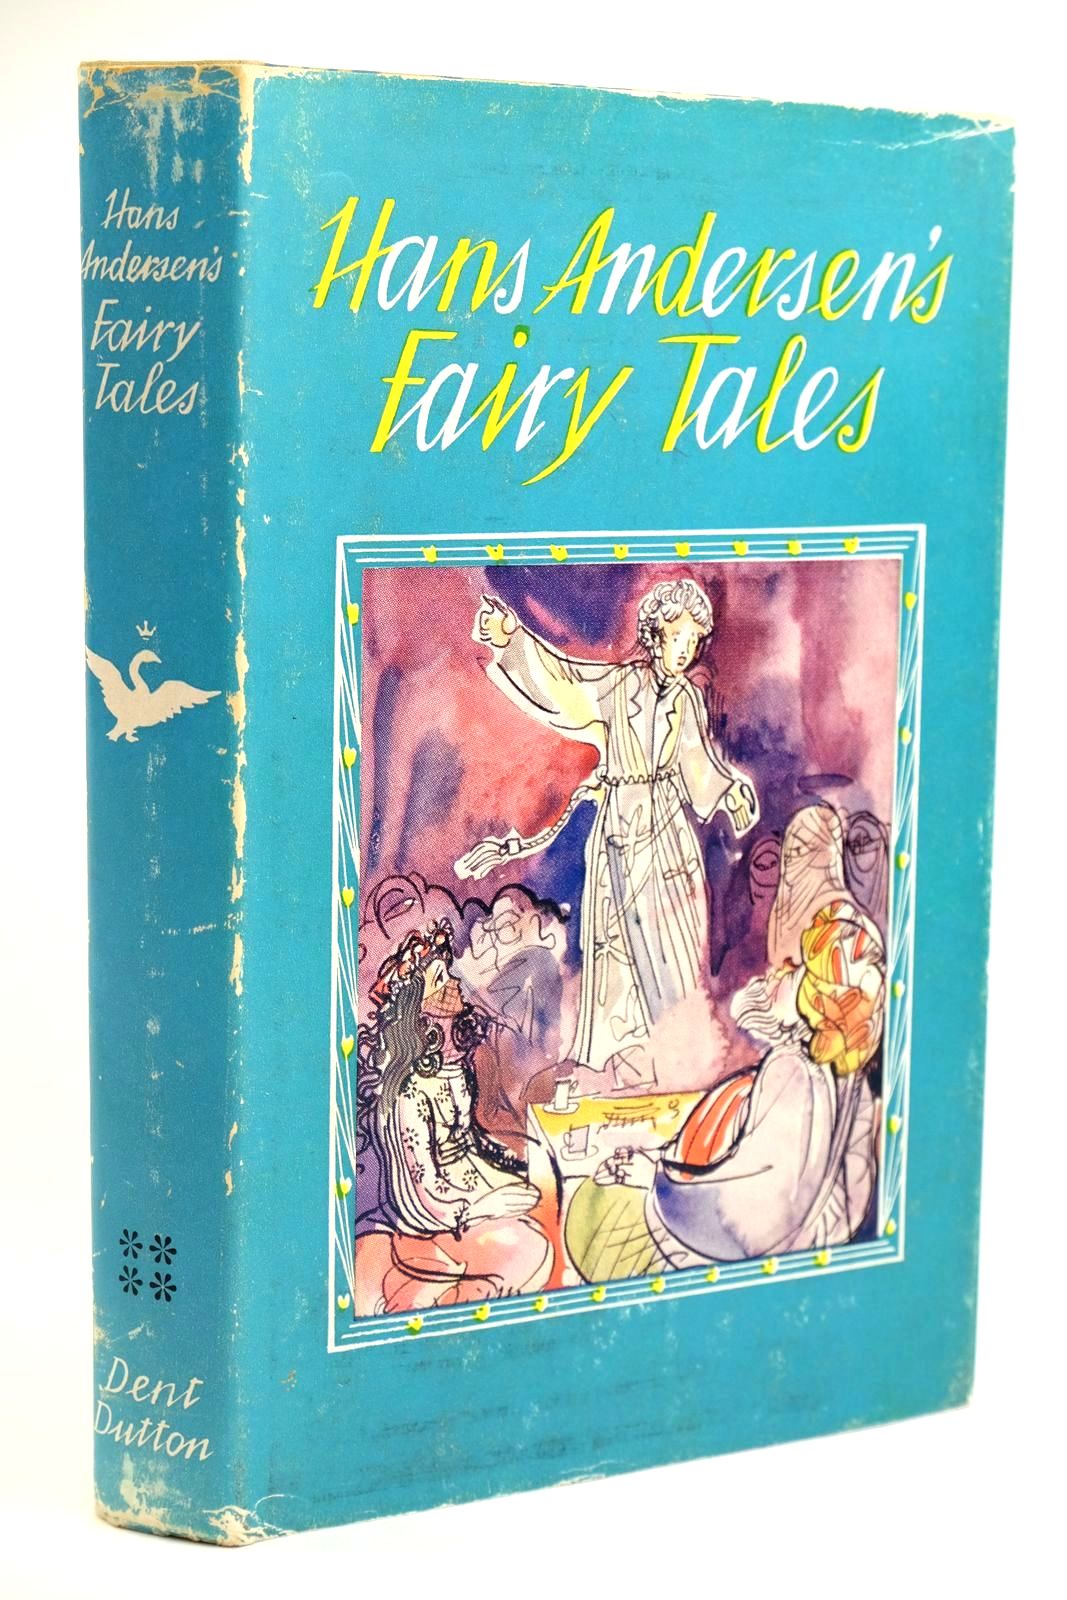 Photo of HANS ANDERSEN'S FAIRY TALES written by Spink, Reginald
Andersen, Hans Christian illustrated by Baumhauer, H. published by J.M. Dent & Sons Ltd. (STOCK CODE: 1319182)  for sale by Stella & Rose's Books